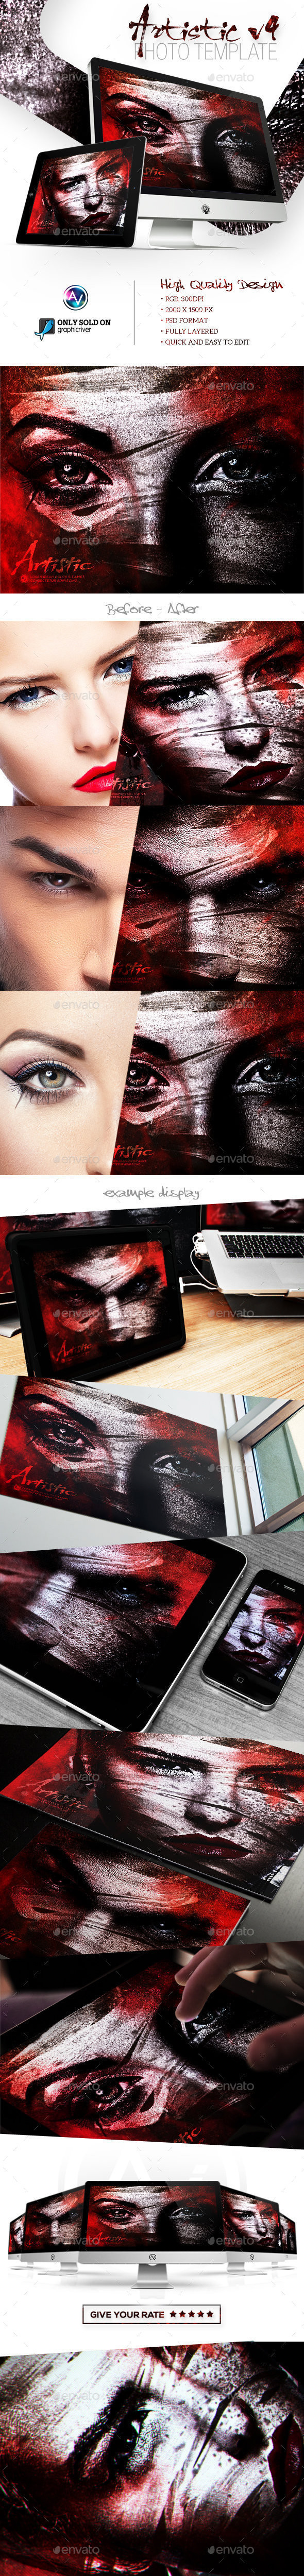 Preview 20  20artistic 20photo 20template 20v4 20 design 20by 20amorjesu 